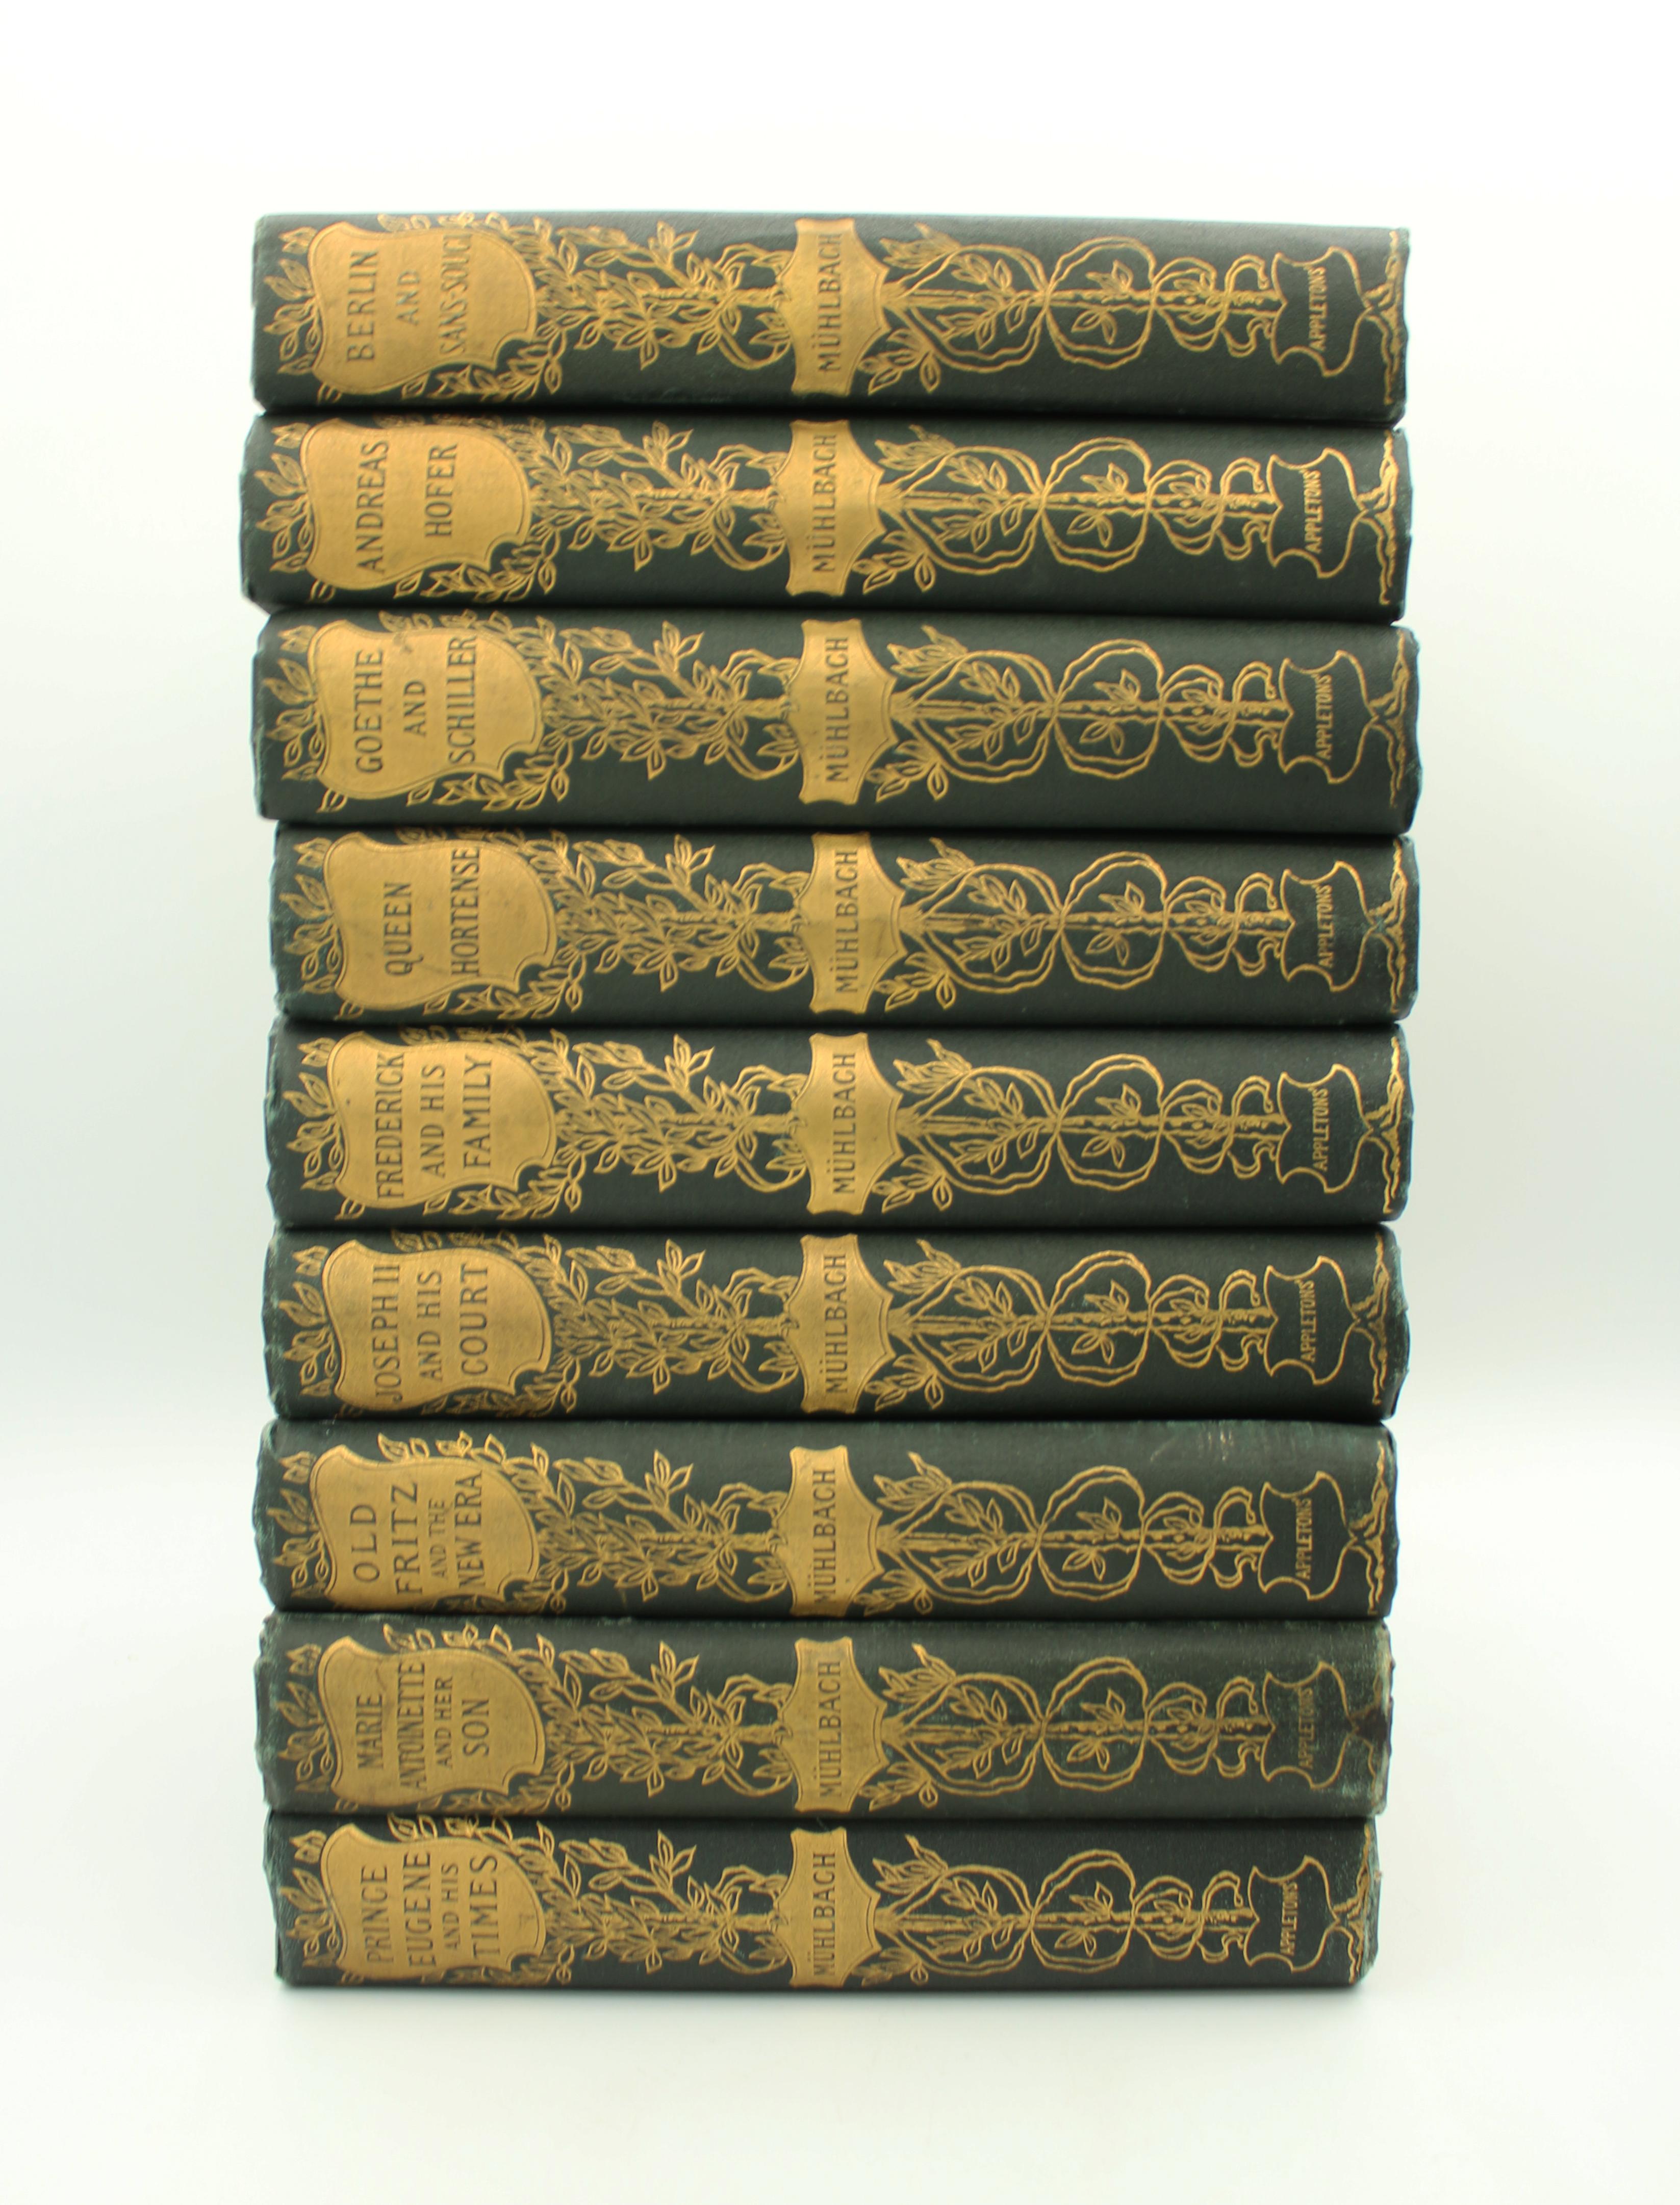 Antique hardcover set of 18 works by Luise Mülbach (1814-1873). Published in 1897 by D. Appleton and Company, New York. Extensive gilt embossed design on the spine and embossed fronts. Each approx. 1 3/8